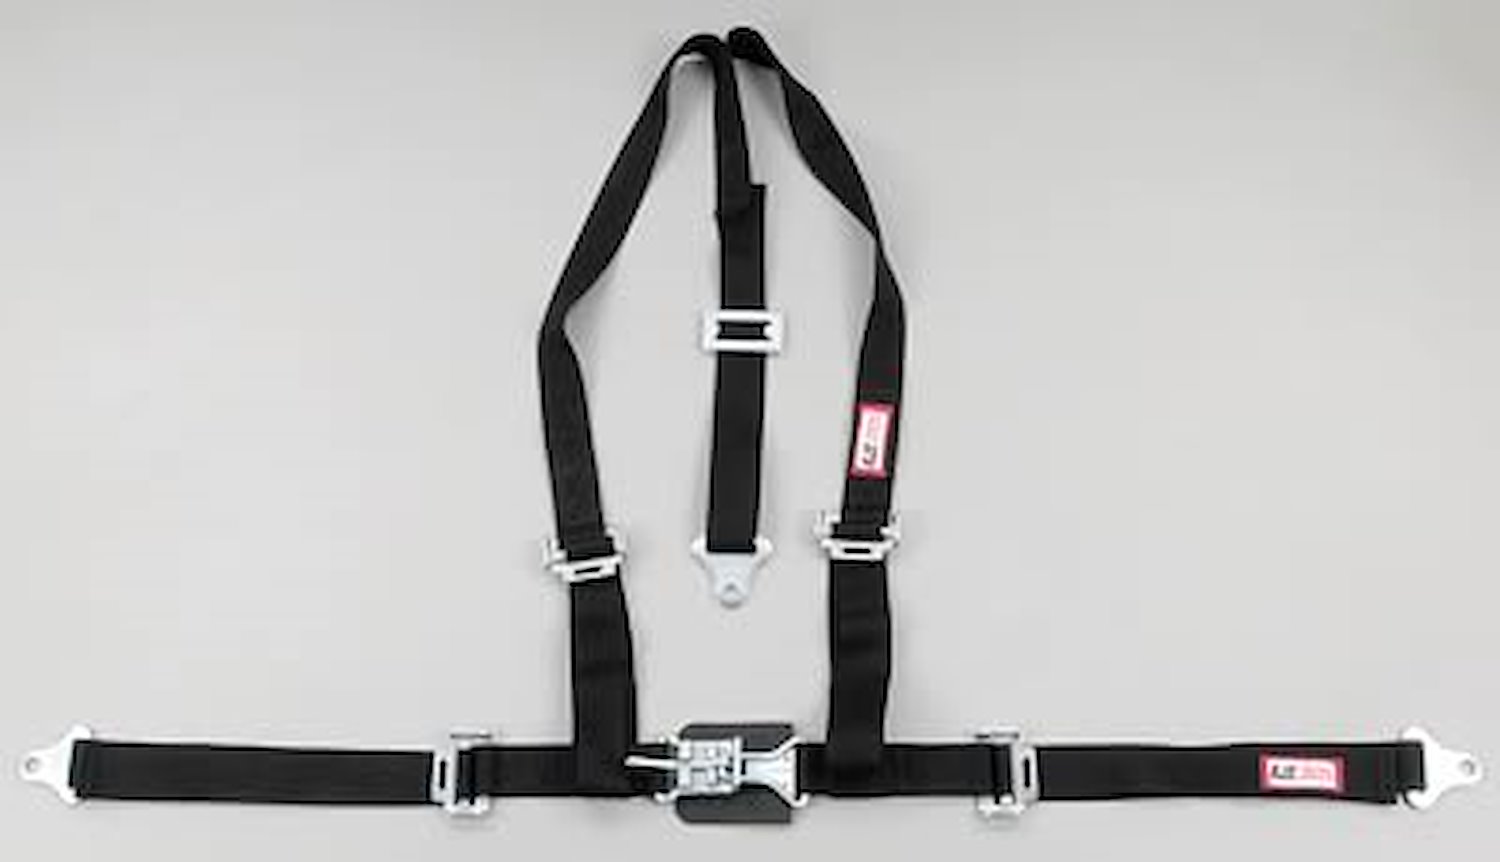 NON-SFI L&L HARNESS 3 PULL DOWN Lap Belt SEWN IN 2 Shoulder Harness V ROLL BAR Mount ALL SNAP ENDS HOT PINK